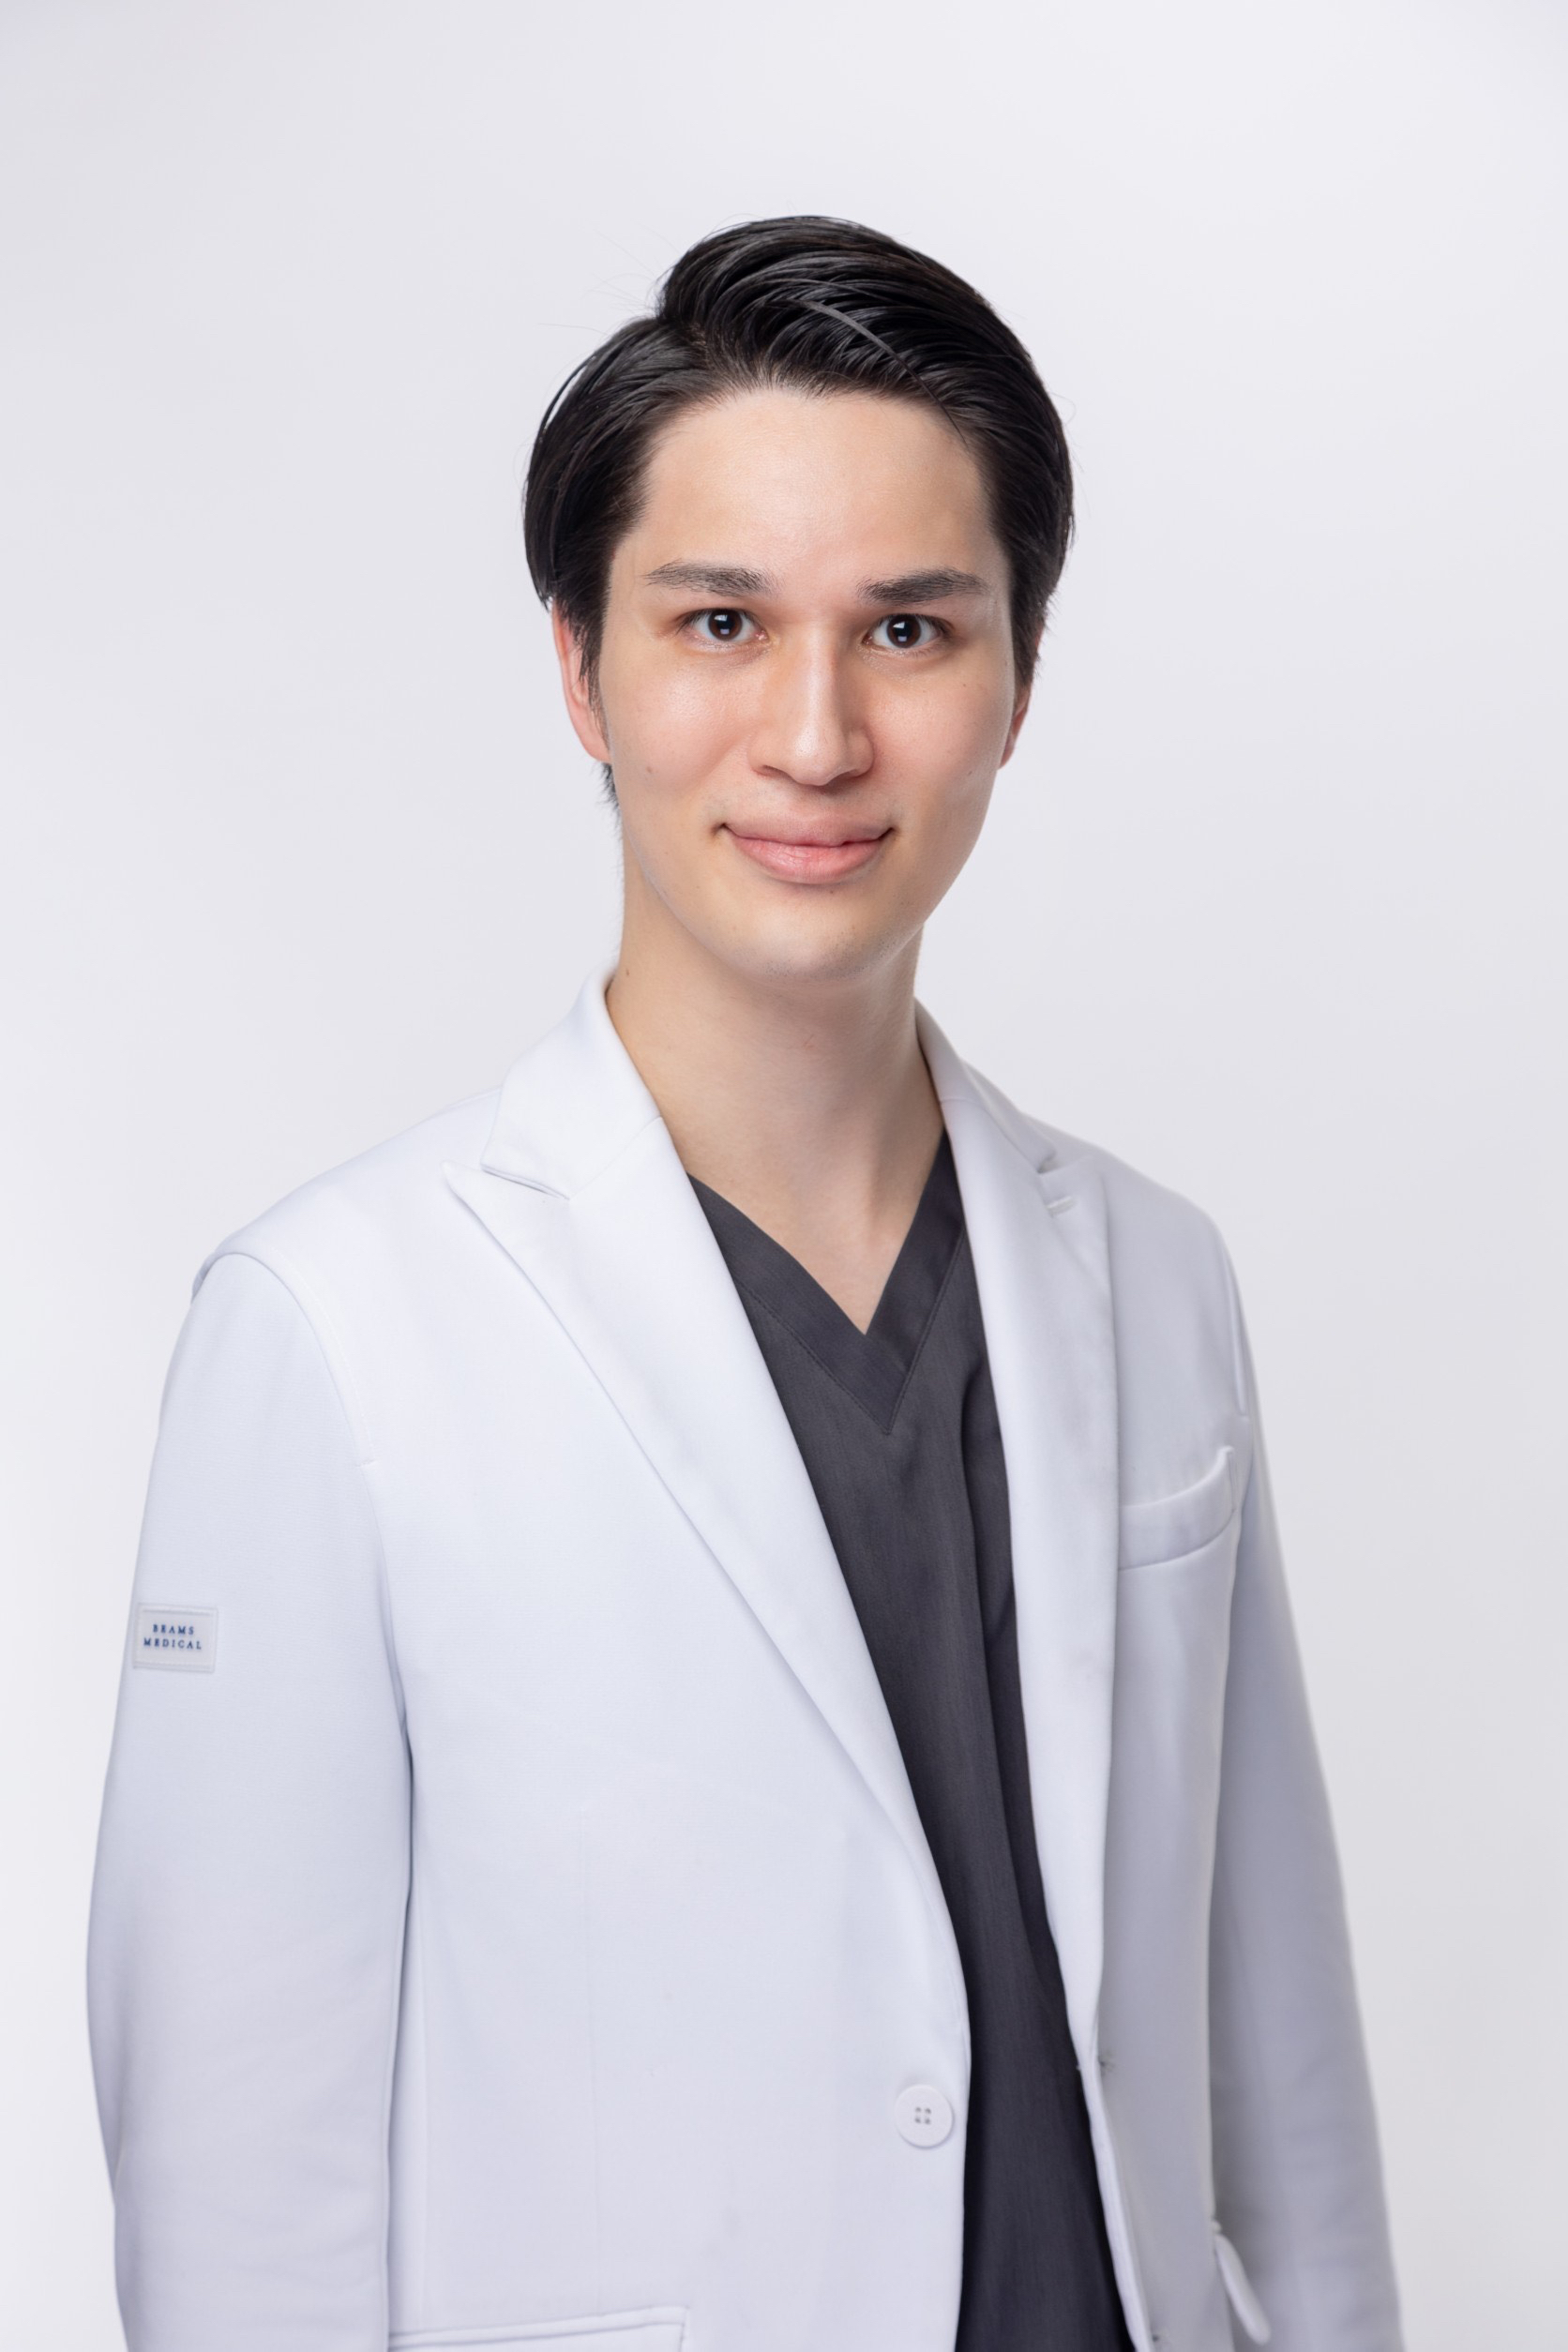 THE ROPPONGI CLINIC, Based In Japan To Attract More Rhinoplasty Treatments Provided Its Cutting Edge Techniques